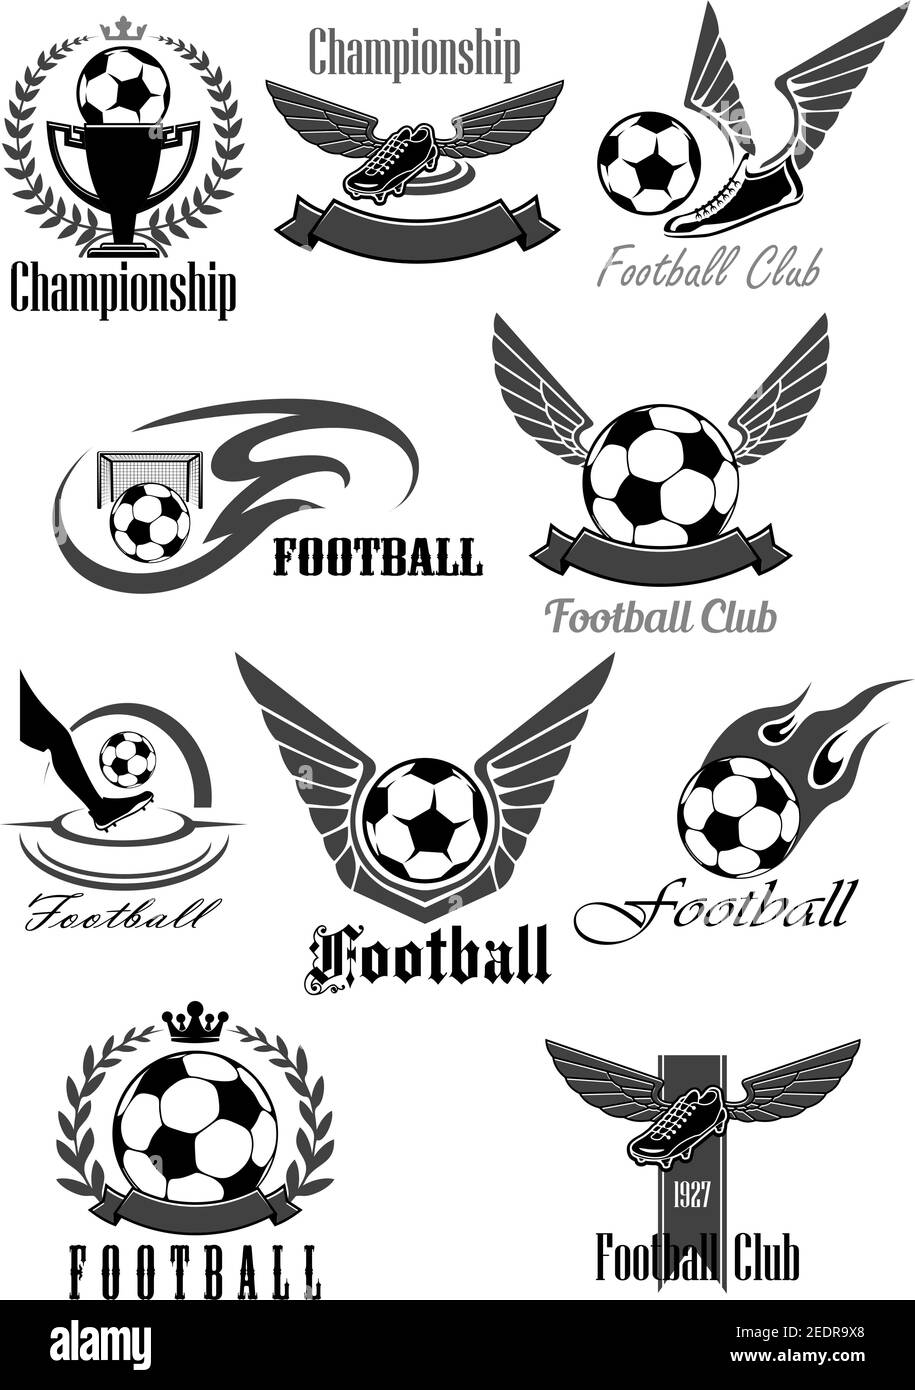 Football or soccer icons for sport club or championship game award. Vector symbols of fire ball with wings for goal, footballer boots or cleats, winne Stock Vector